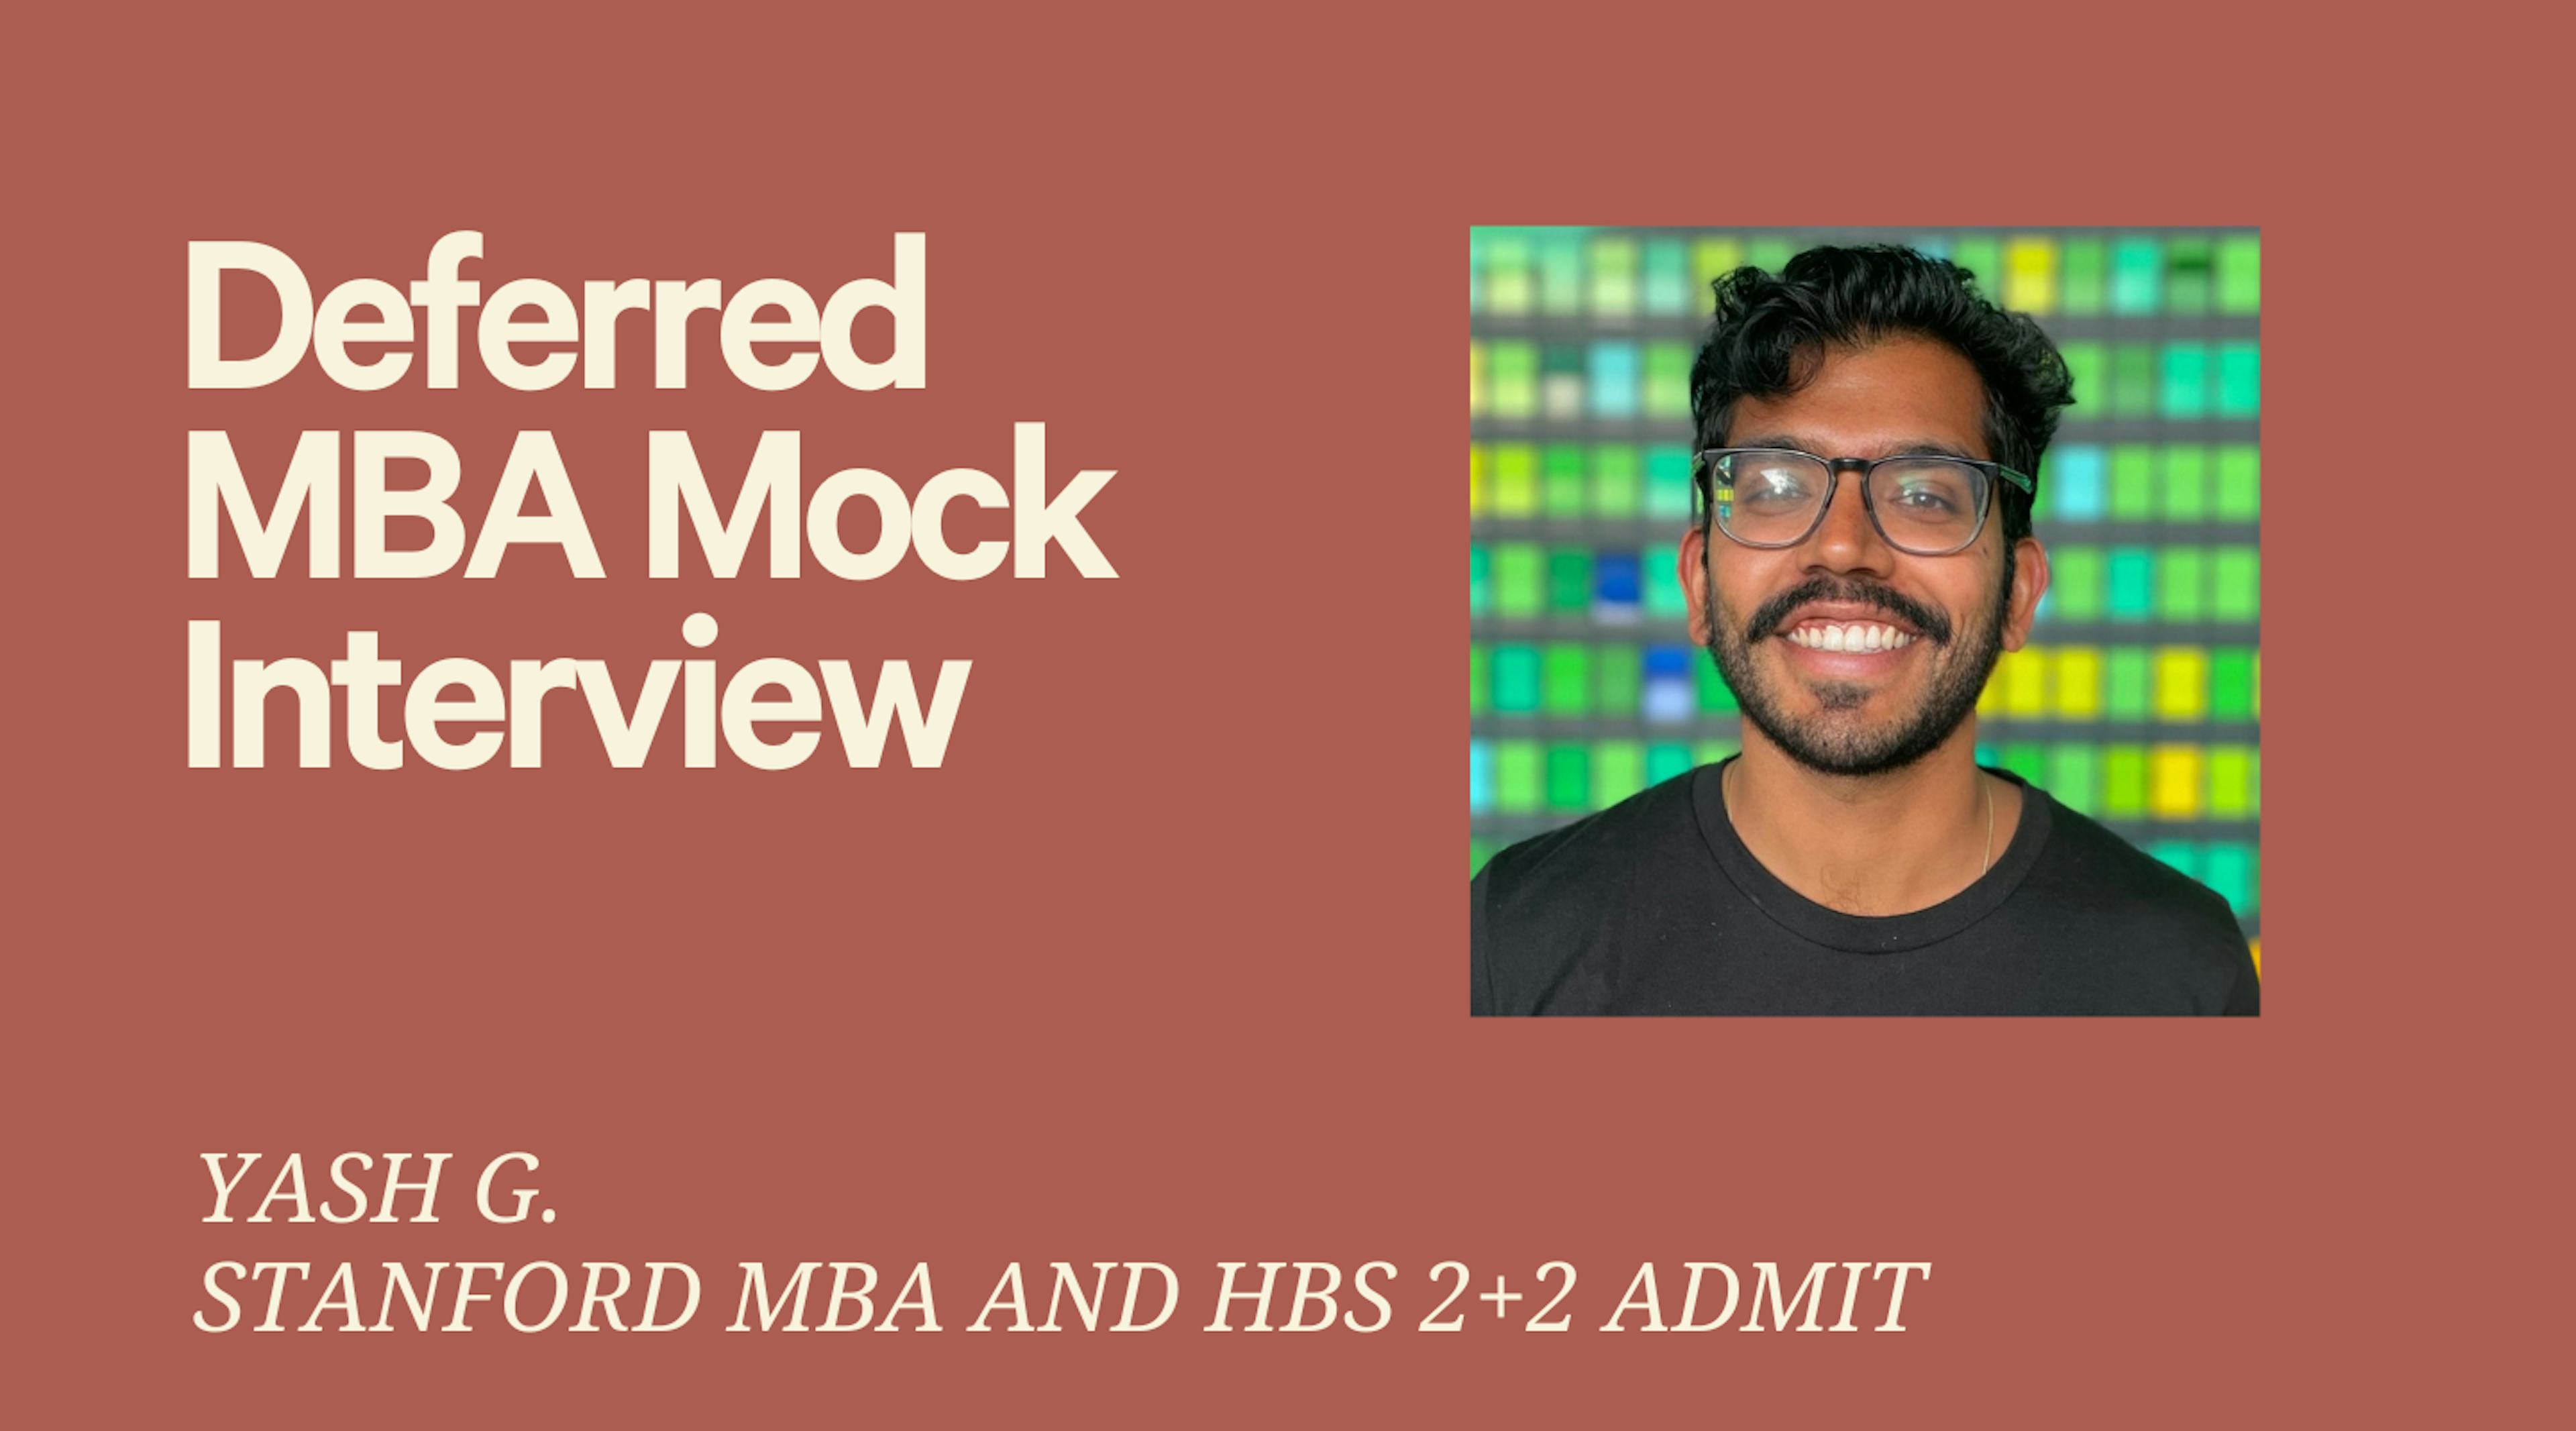 Deferred MBA Mock Interview Package